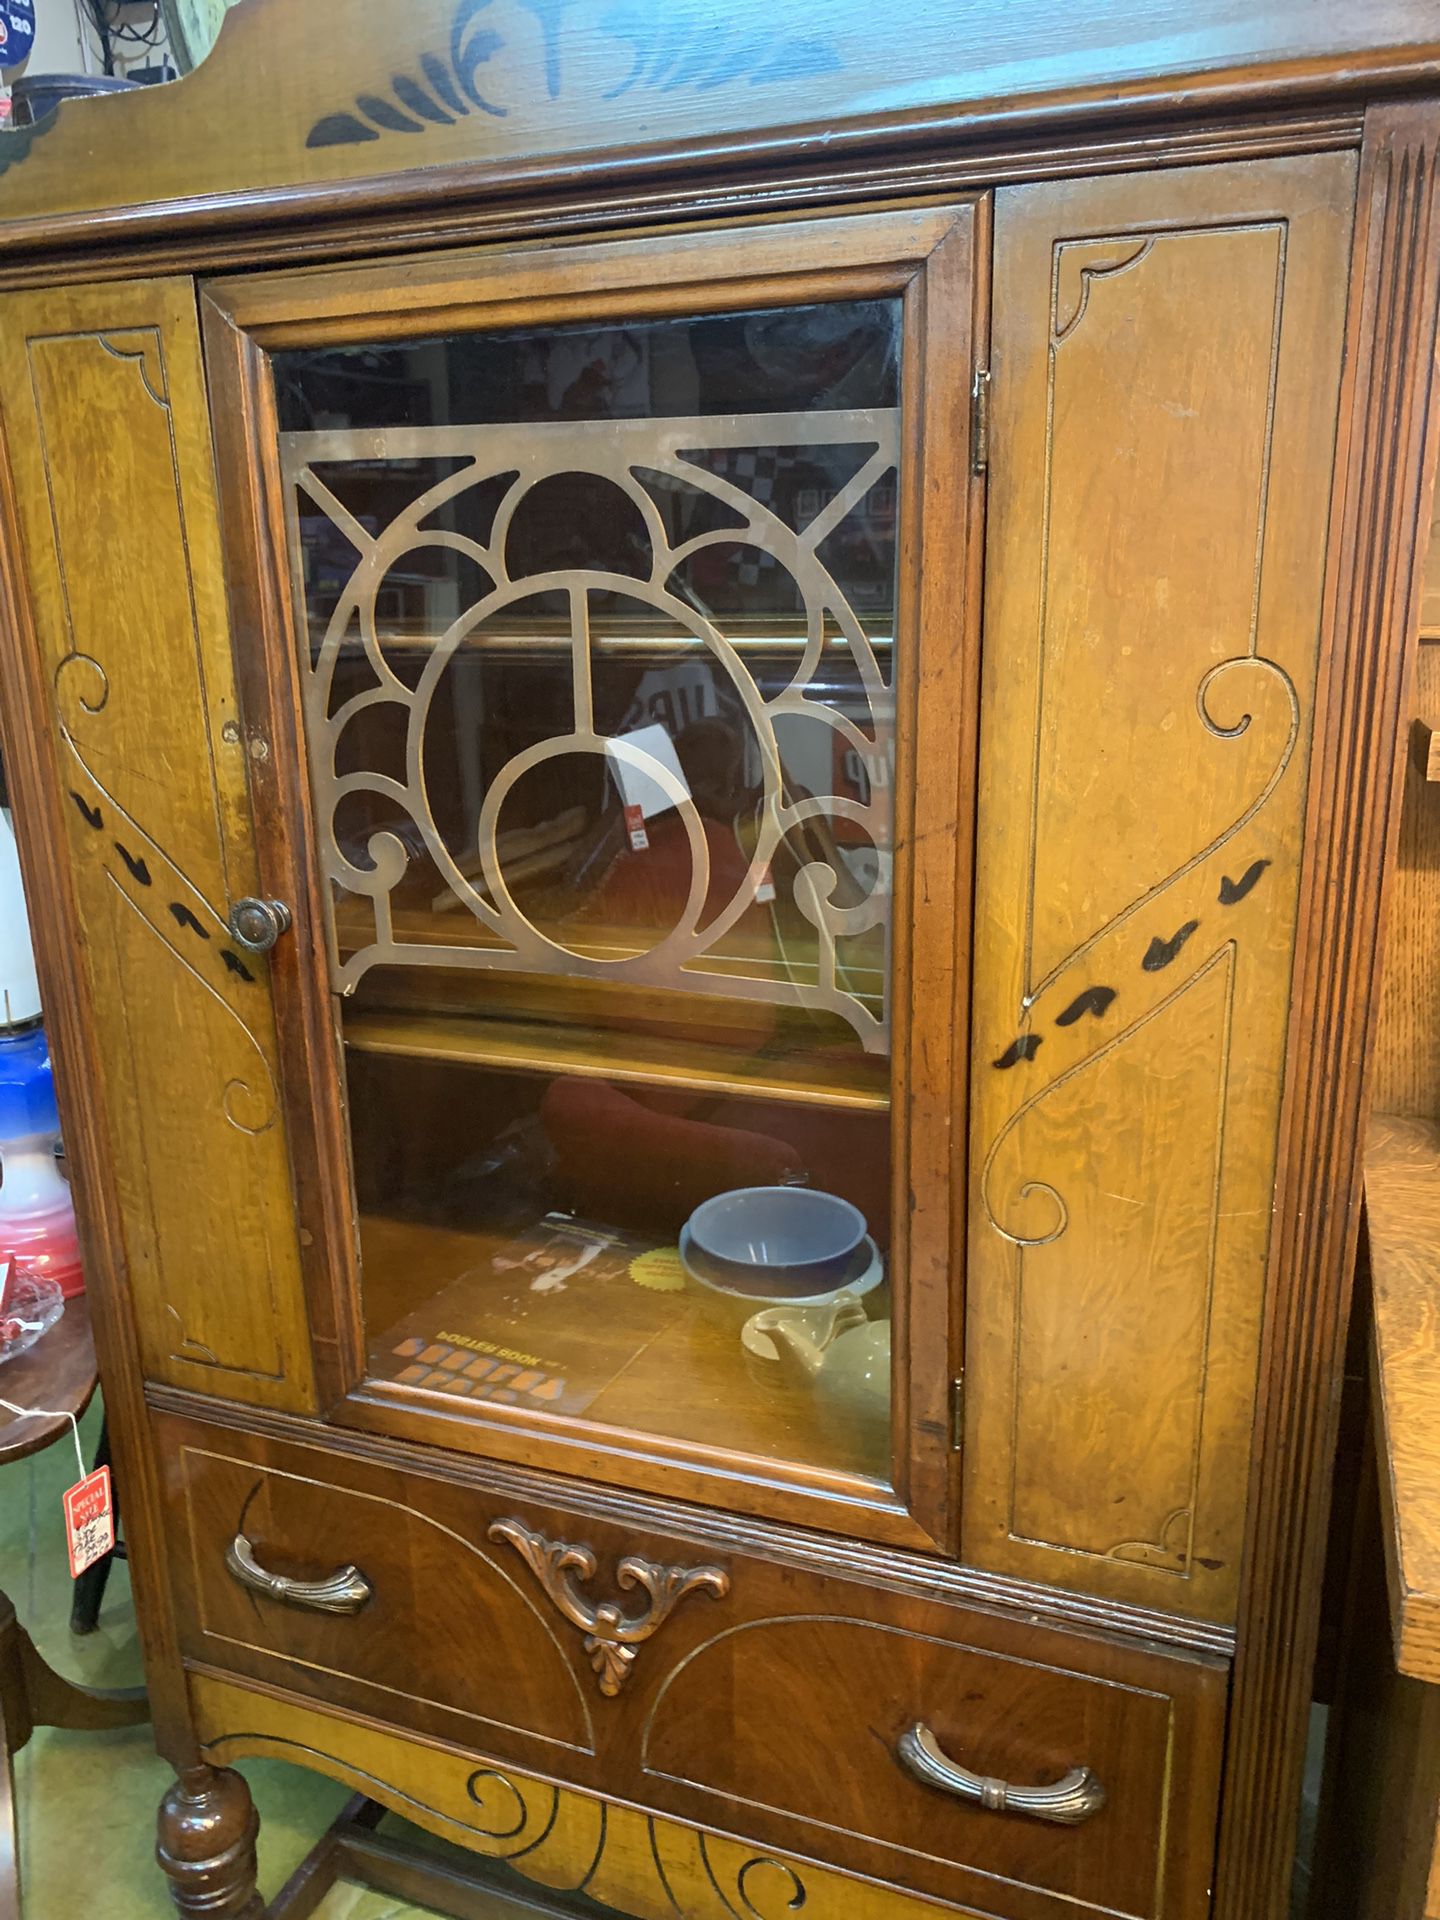 35x15x65 antique China storage display cabinet. 225.00.  Johanna at Antiques and More. Located at 316b Main Street Buda. Antiques vintage retro furnit